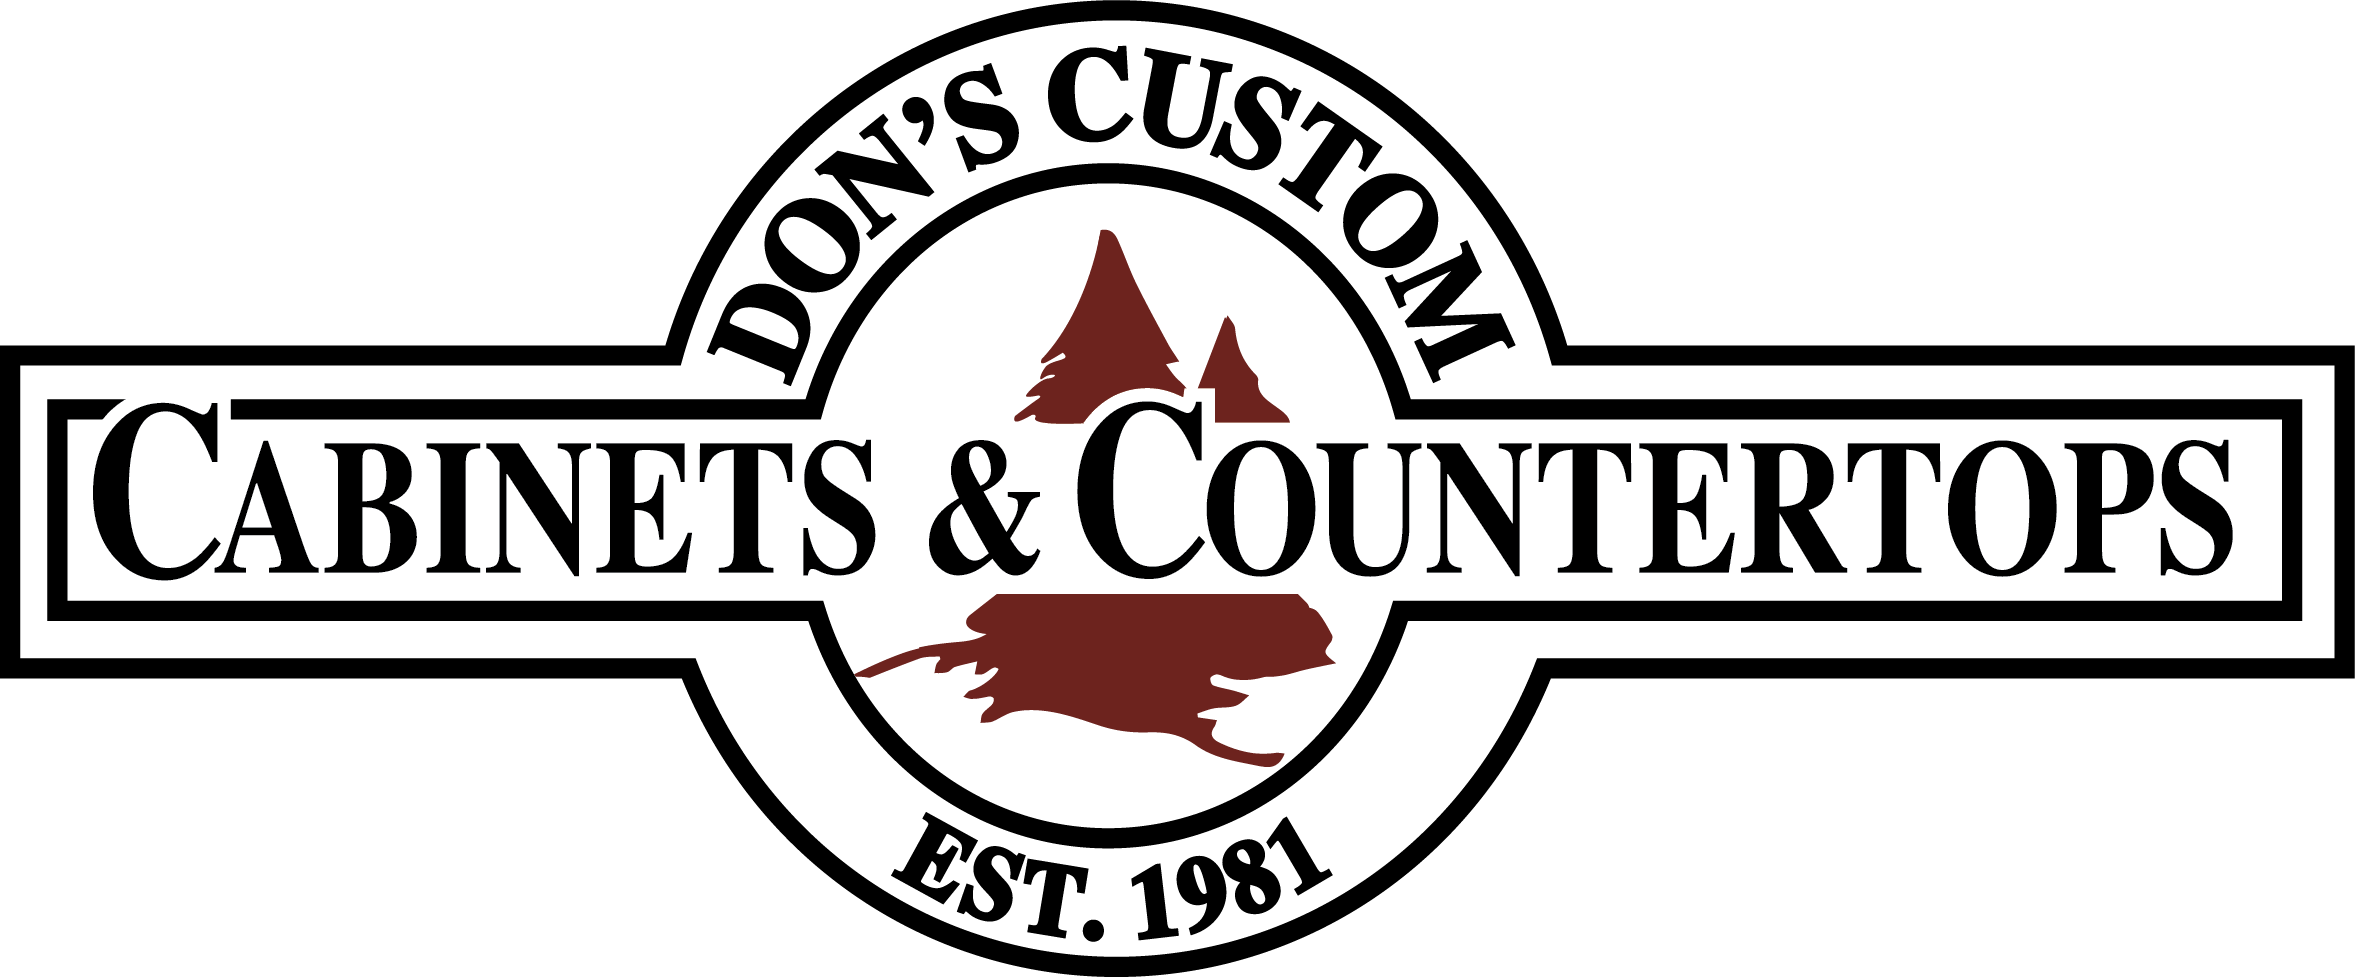 Dons cabinets and countertops logos for bathrooms and kitchens